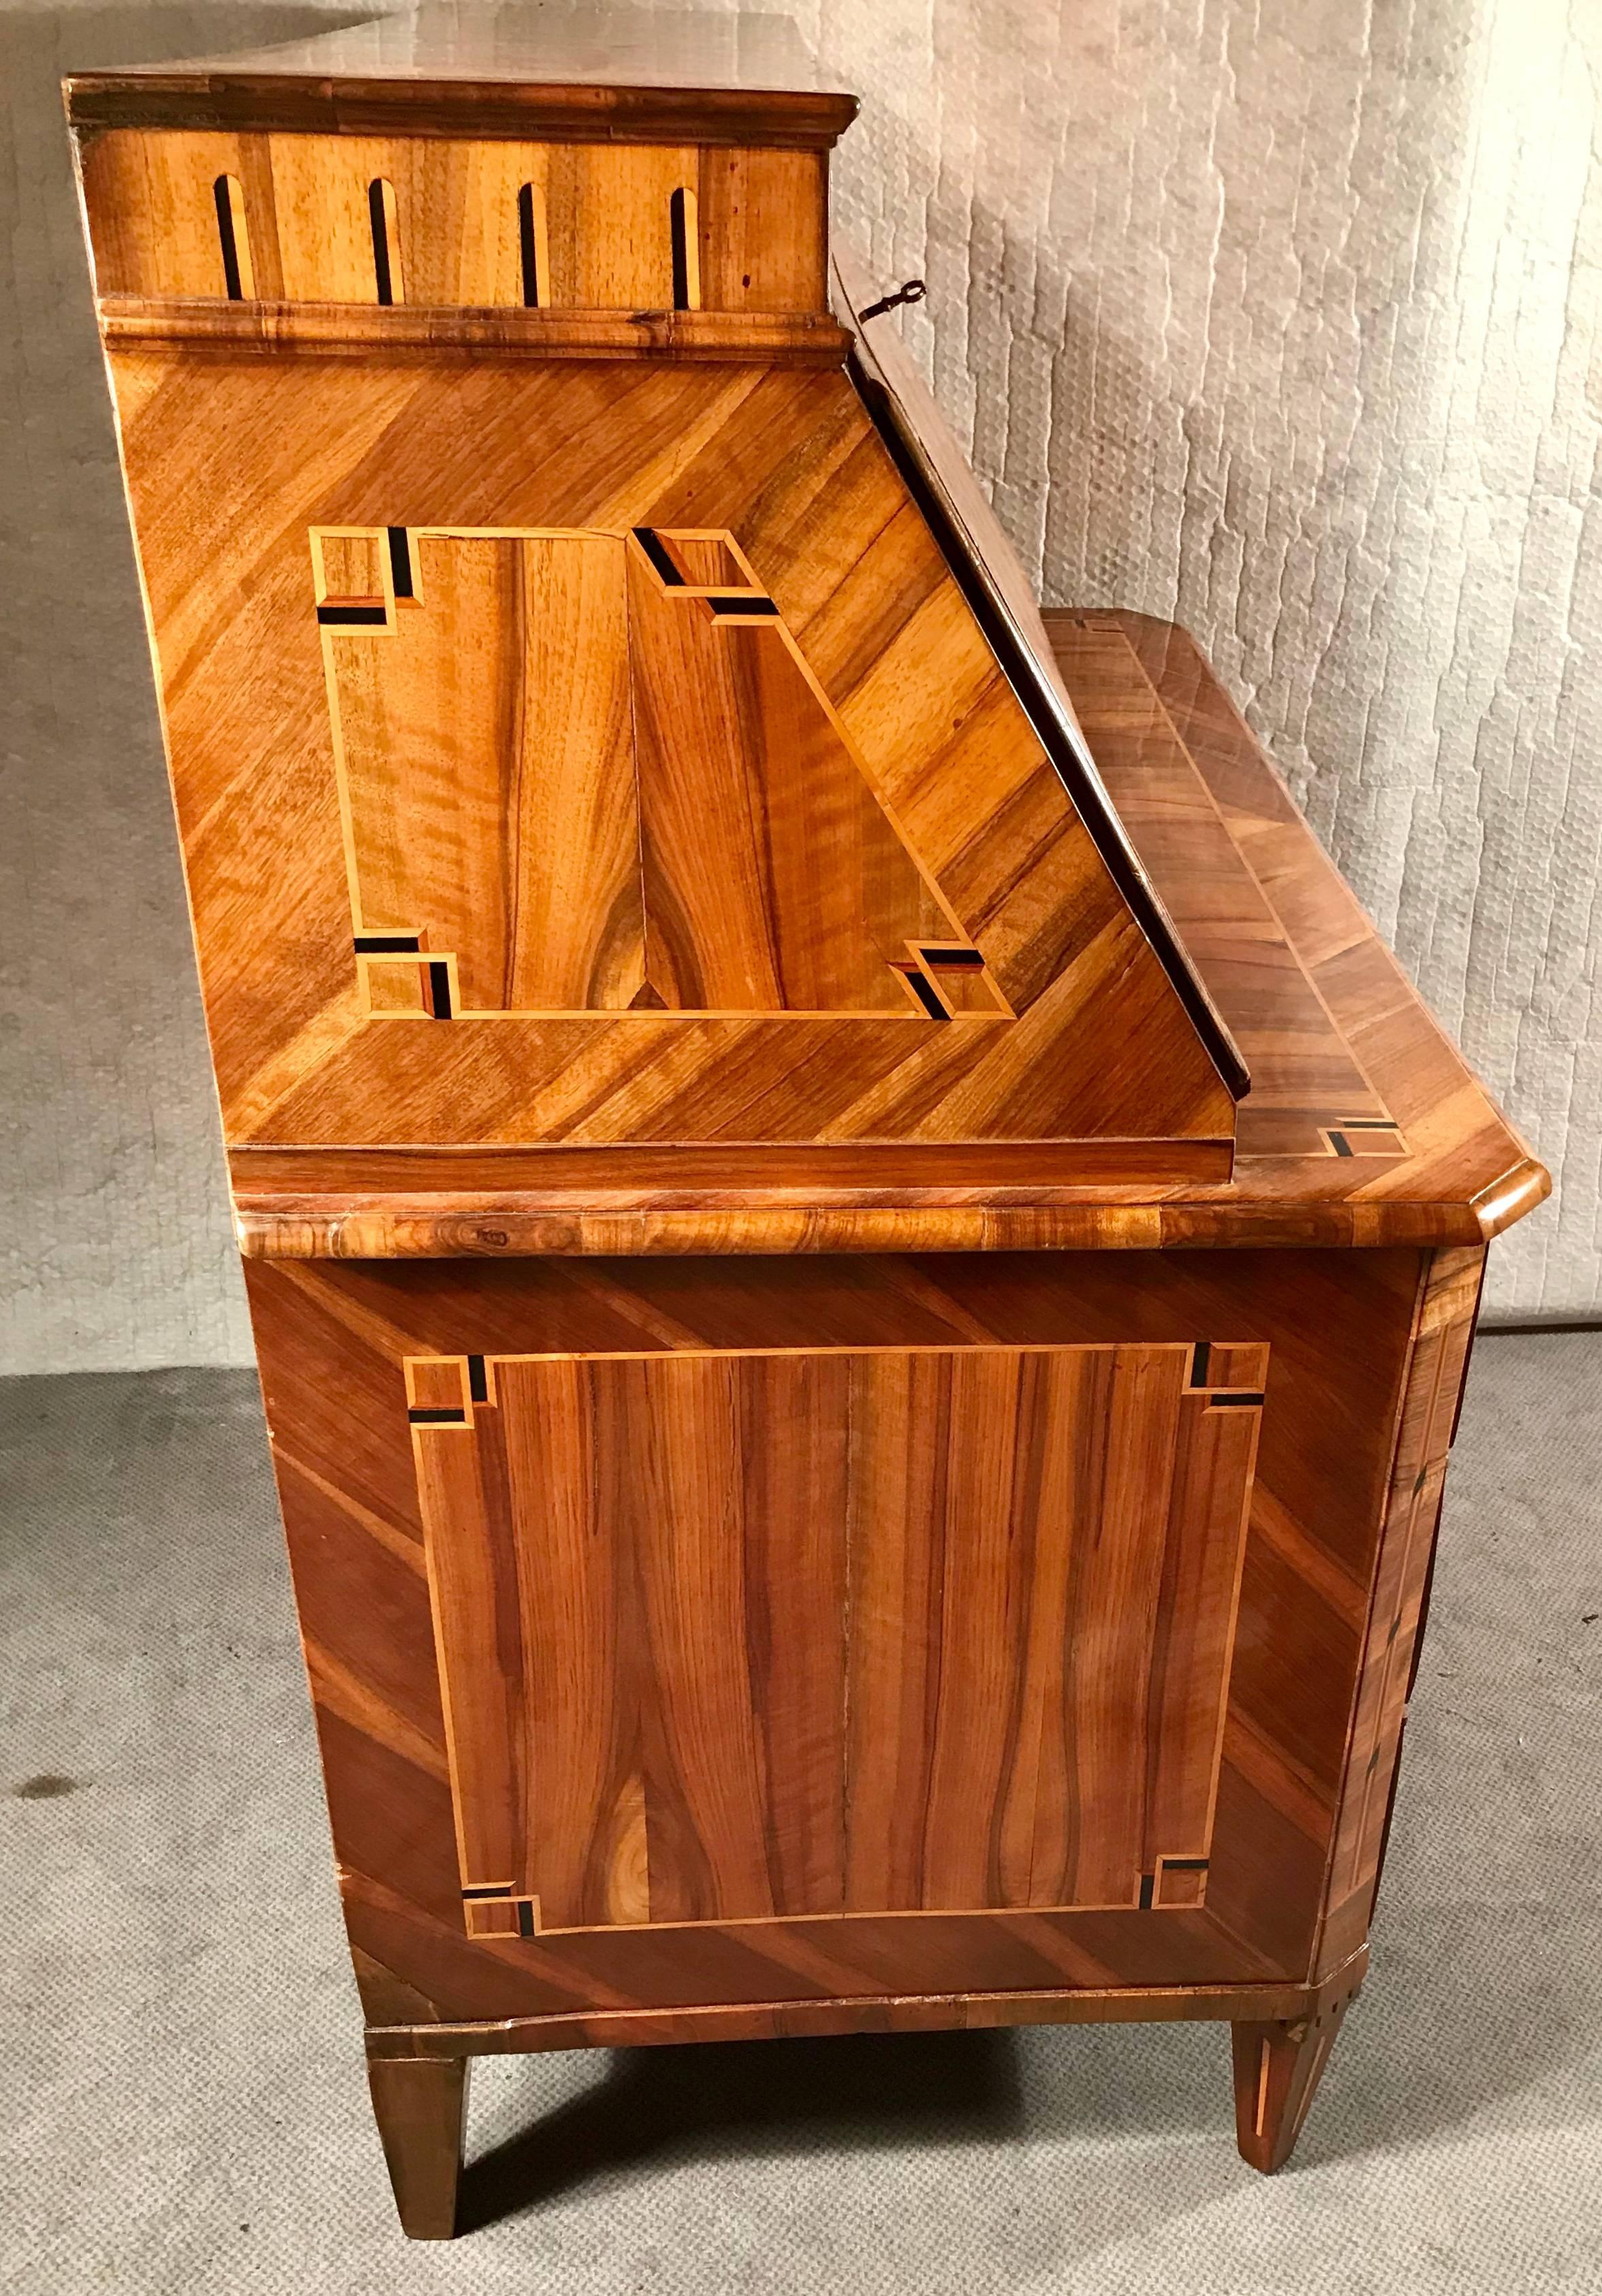 Elegant Louis XVI secretaire, France, 1780, walnut veneer with marquetry in elmwood. In excellent, restored condition. The secretaire will be shipped from Germany, shipping costs to Boston are included.